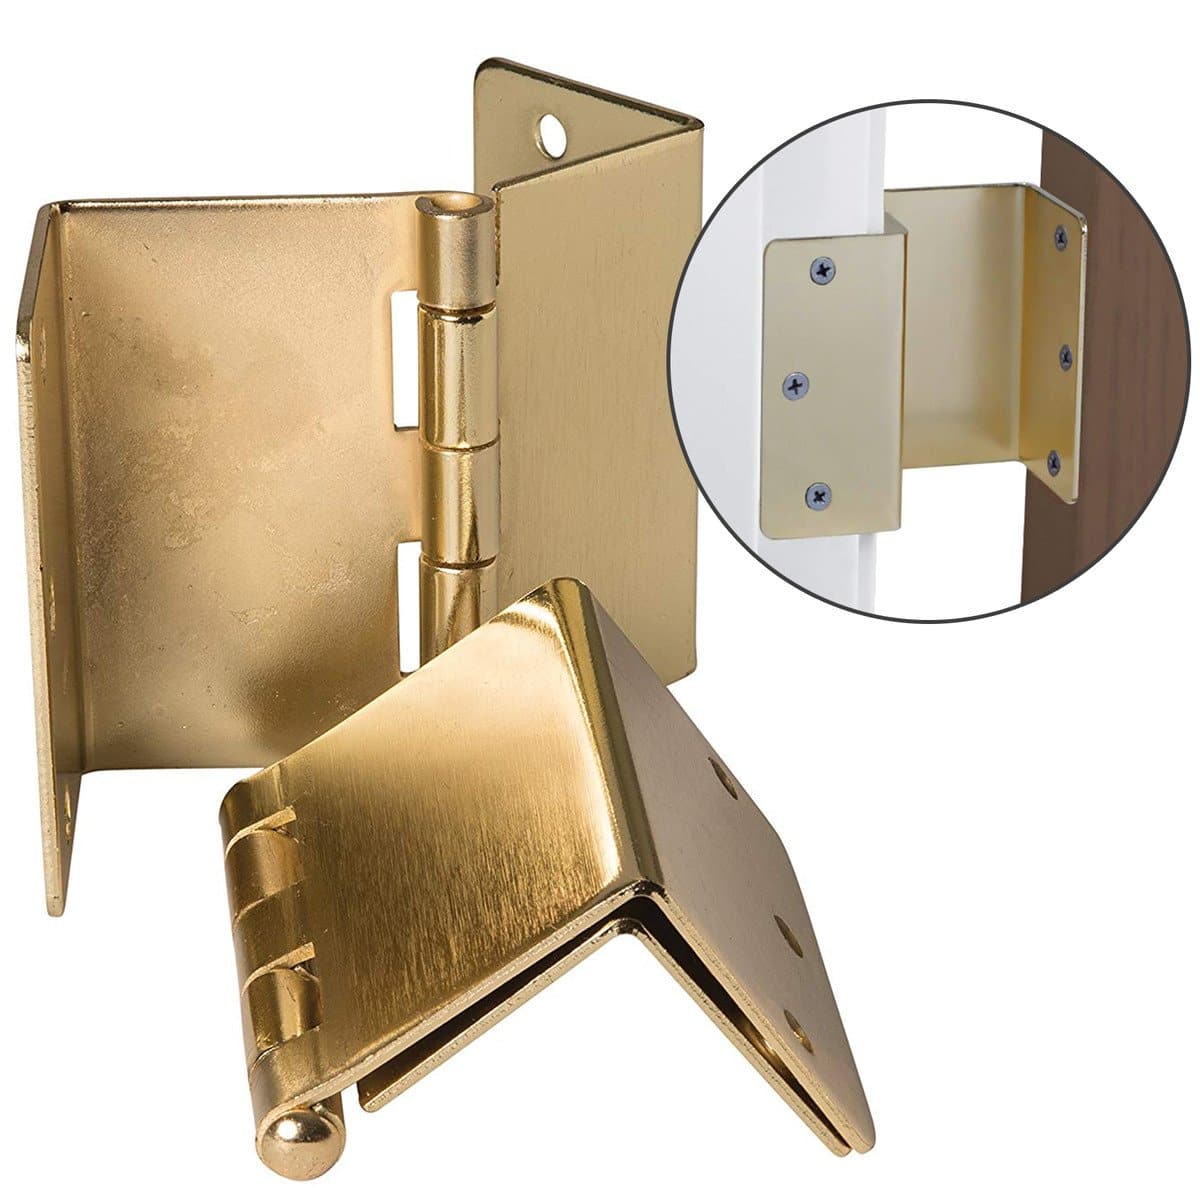 HealthSmart Expandable Door Hinges - Allows Up to 2 Extra Inches For Mobility Accessibility - Senior.com Door Hinges